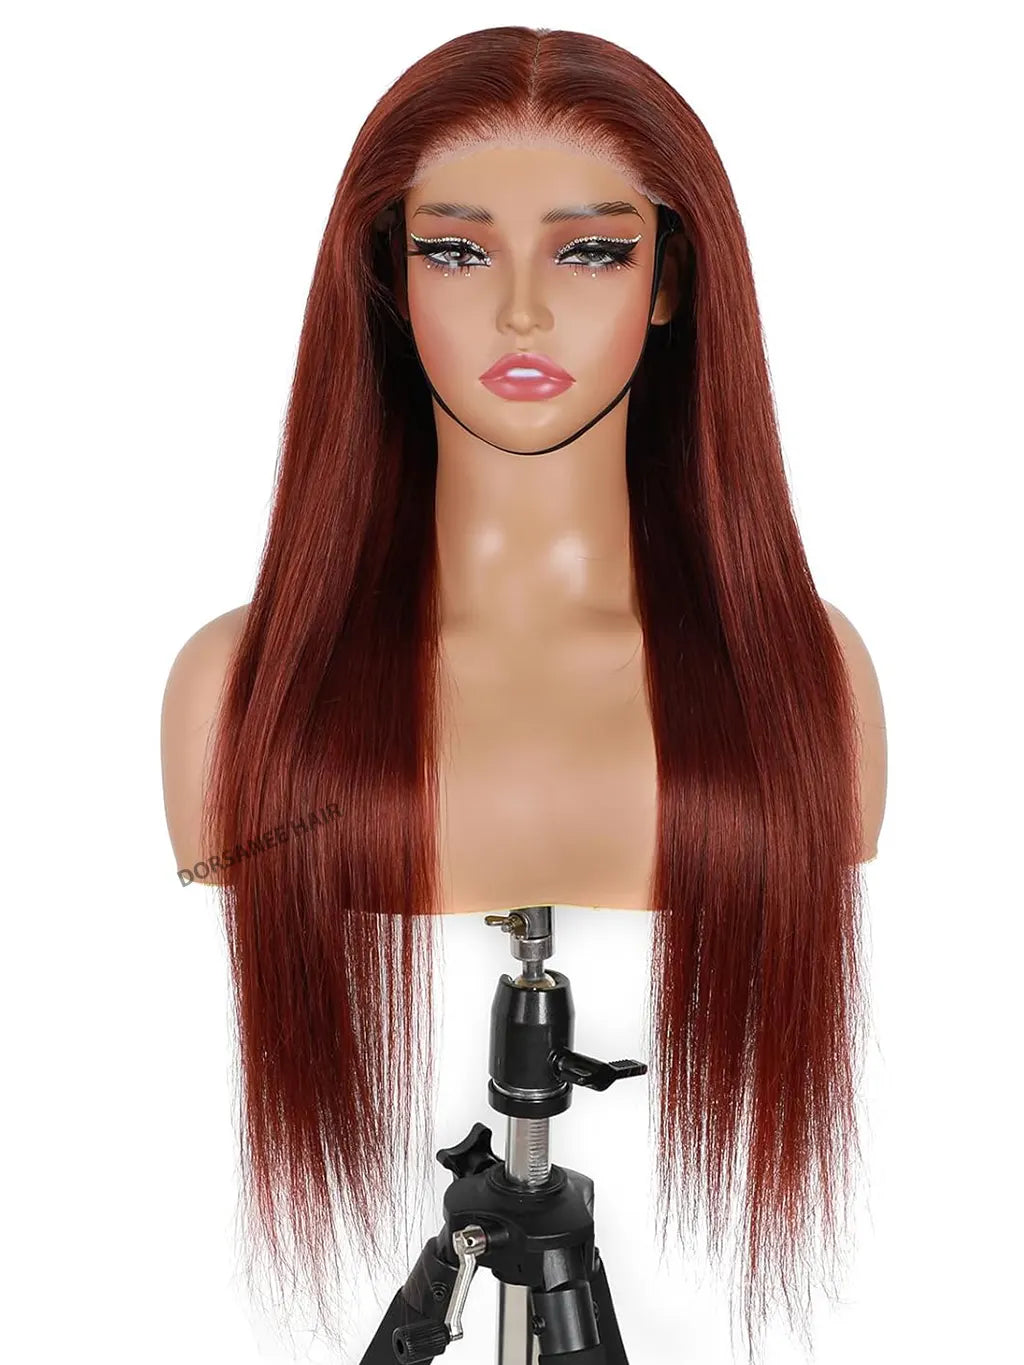 Reddish Brown _Lace_Front_Wigs_Human_Hair_Pre_Plucked_6x4_HD_Straight_Human_Hair_Wear_Go_Wig_Colored_10A_Reddish_Brown_Front_Wig_180_Density_Glueless_Wigs